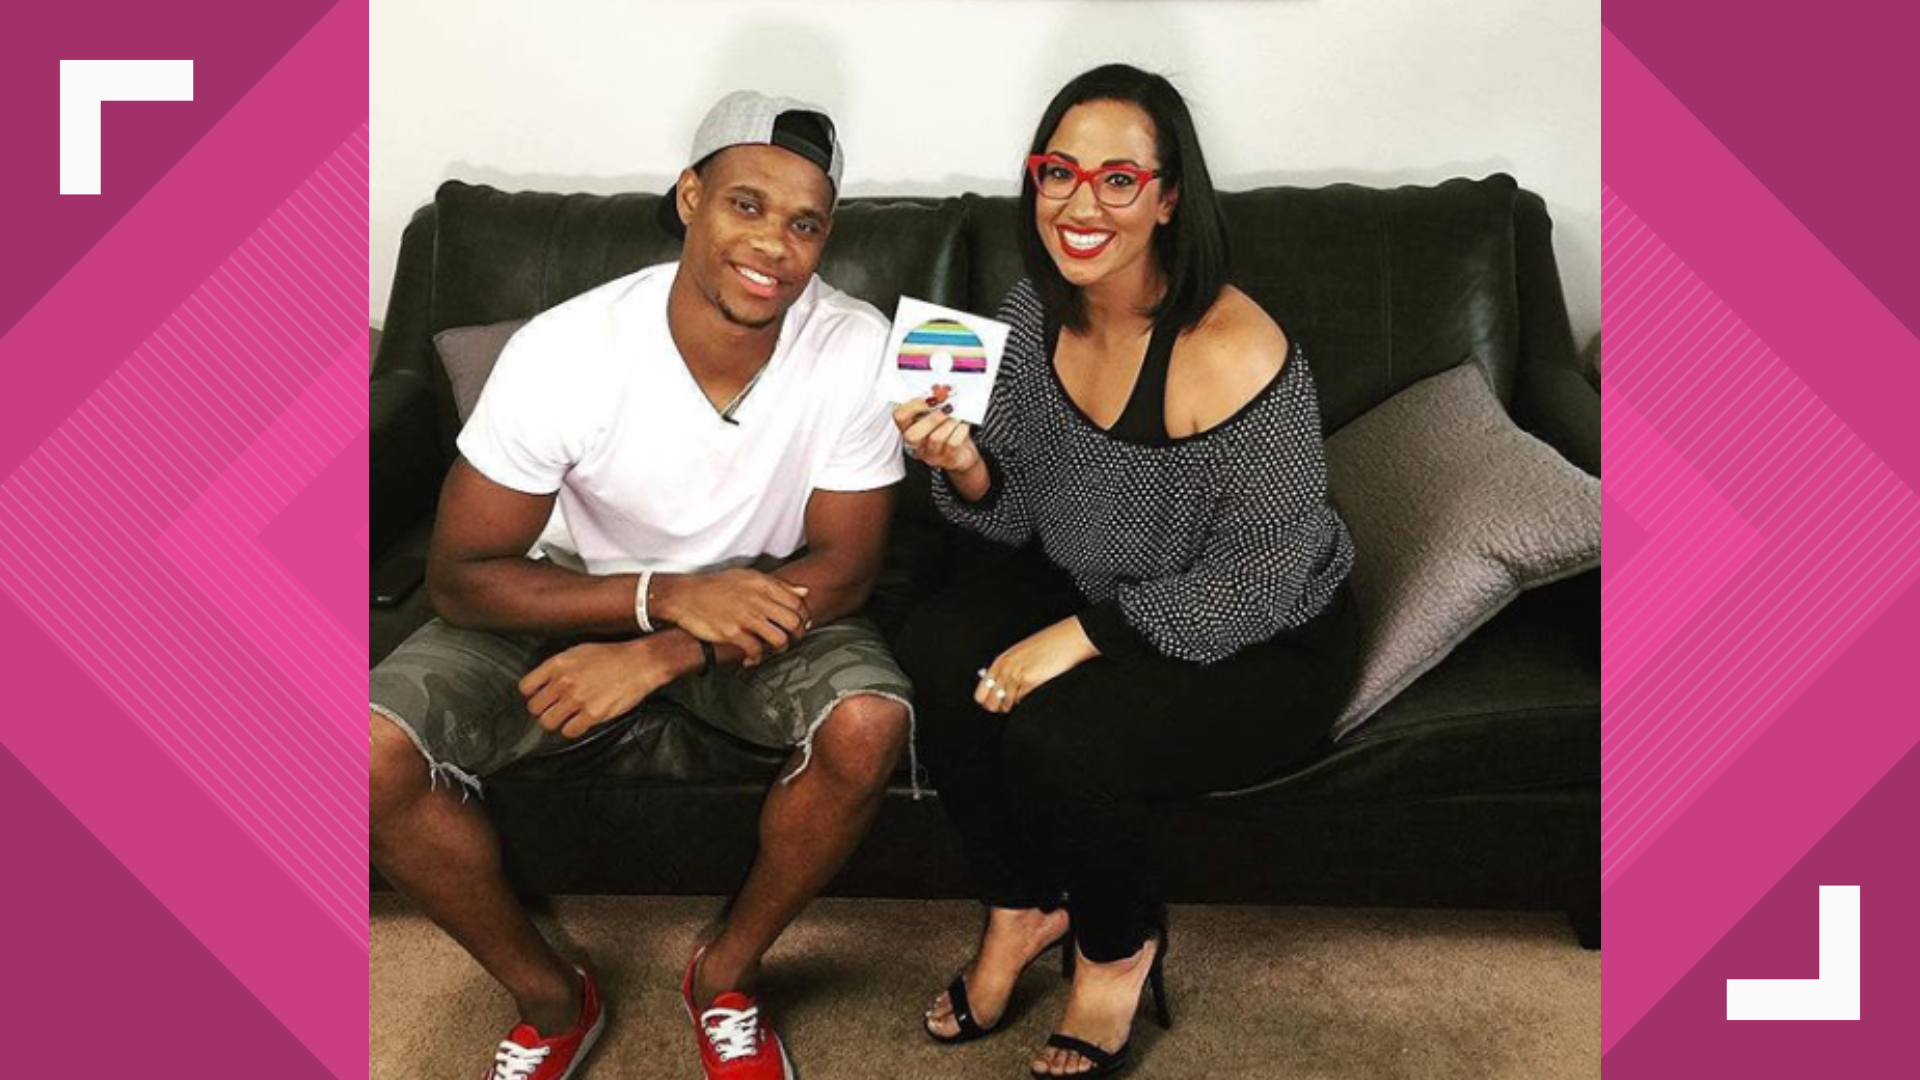 Ariane Datil interviews Jordan Matthews about his life off of the field and his love of Kanye West